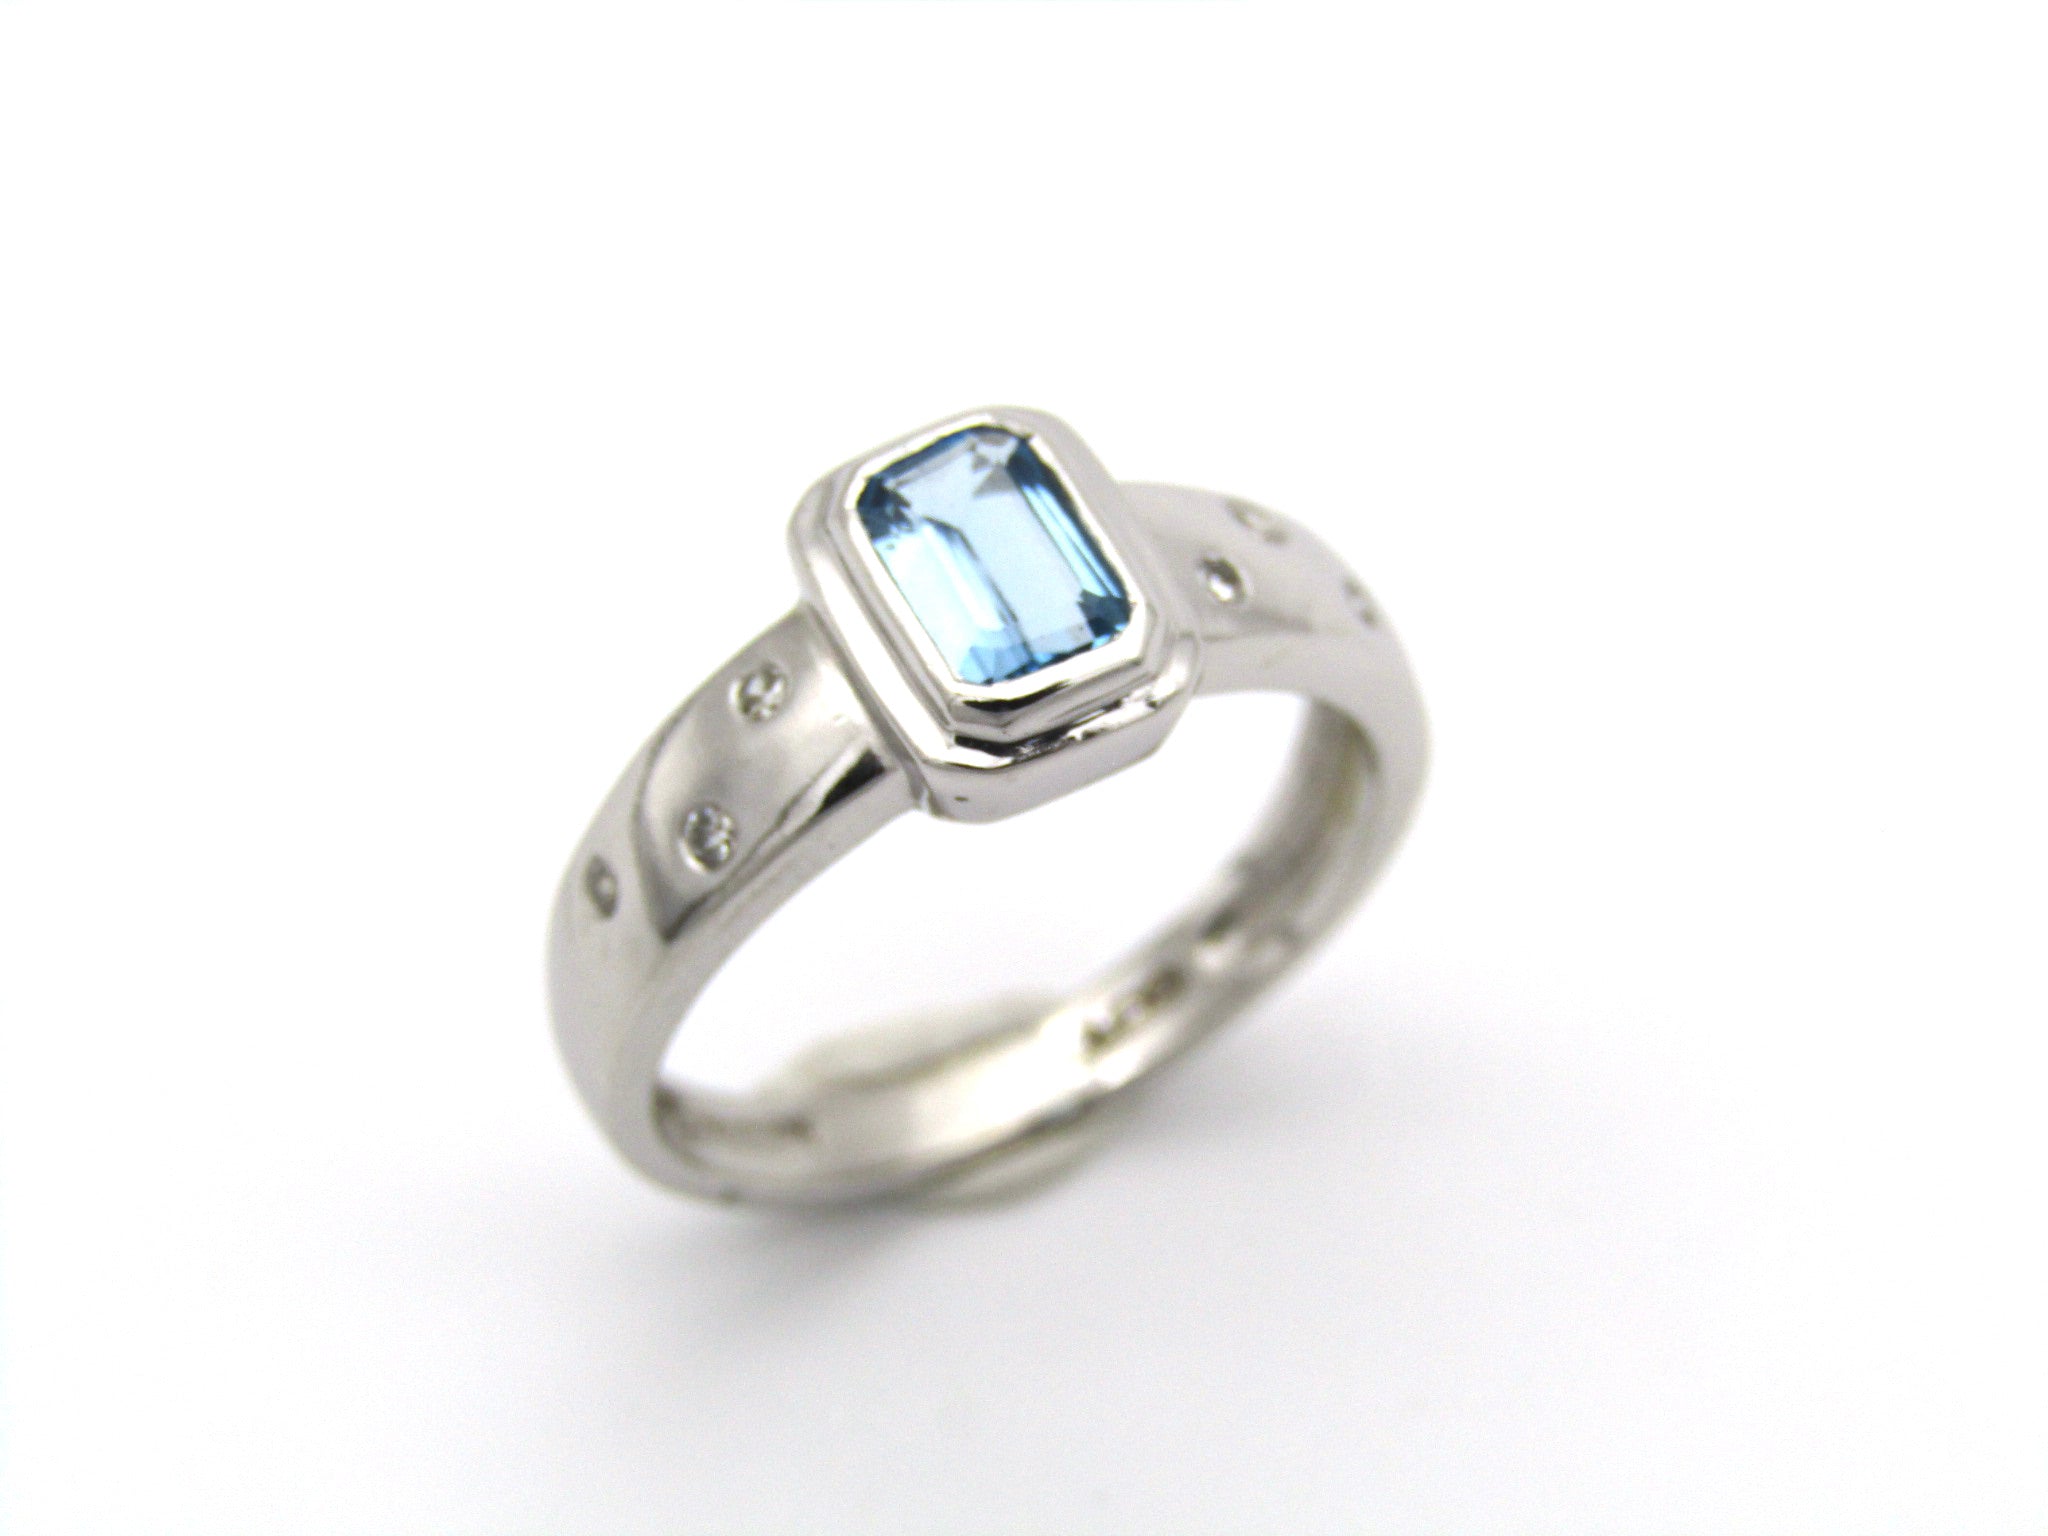 9K gold blue topaz and diamond ring by Browns.